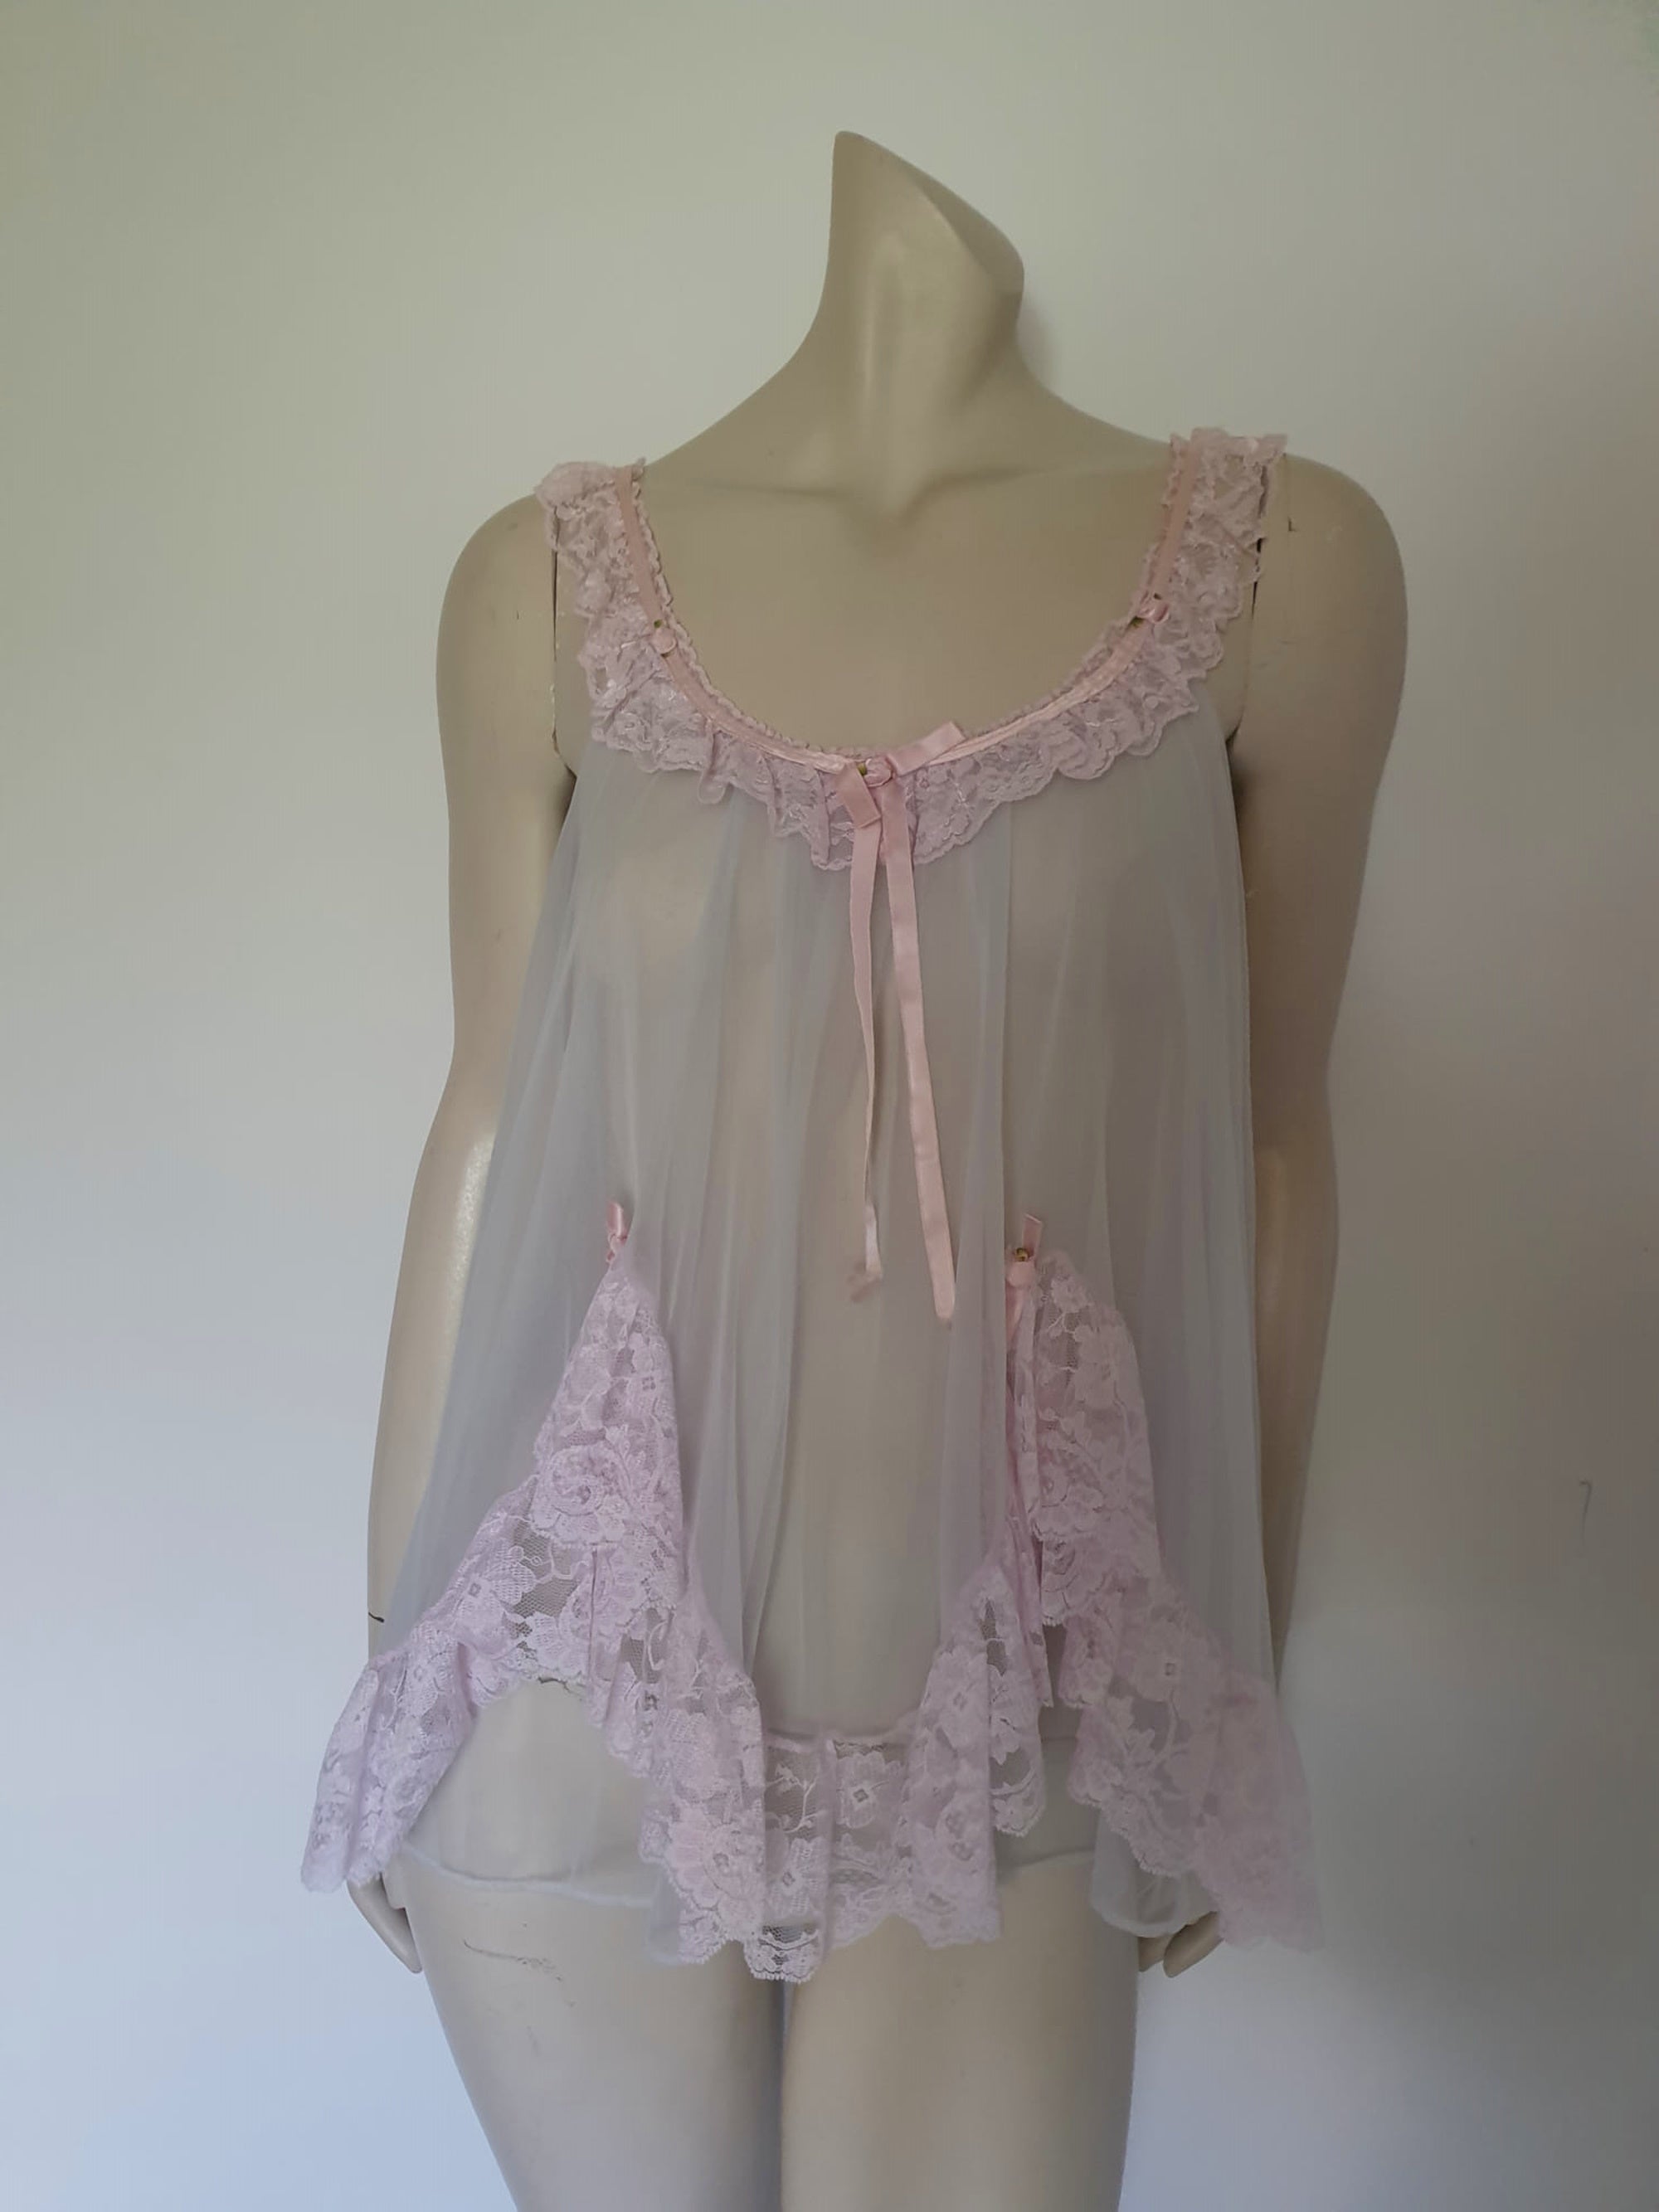 vintage sheer nylon babydoll top nightgown dove grey with pink lace and ribbons small